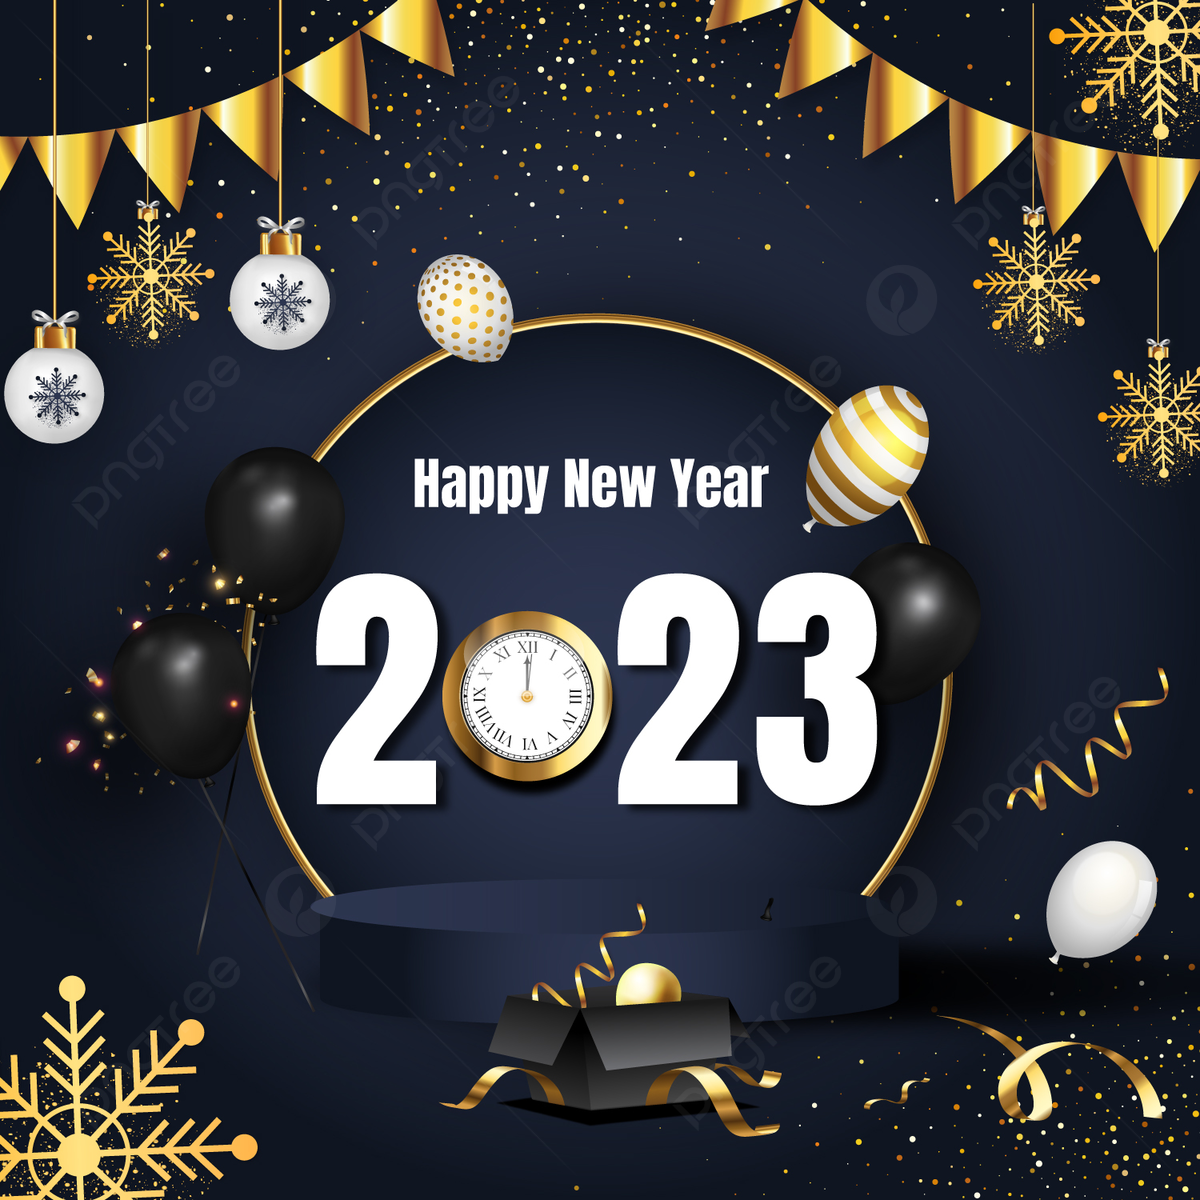 Happy New Year 2023 Poster Background HD, 4K Wallpaper with Shayari, Cover Photo FB